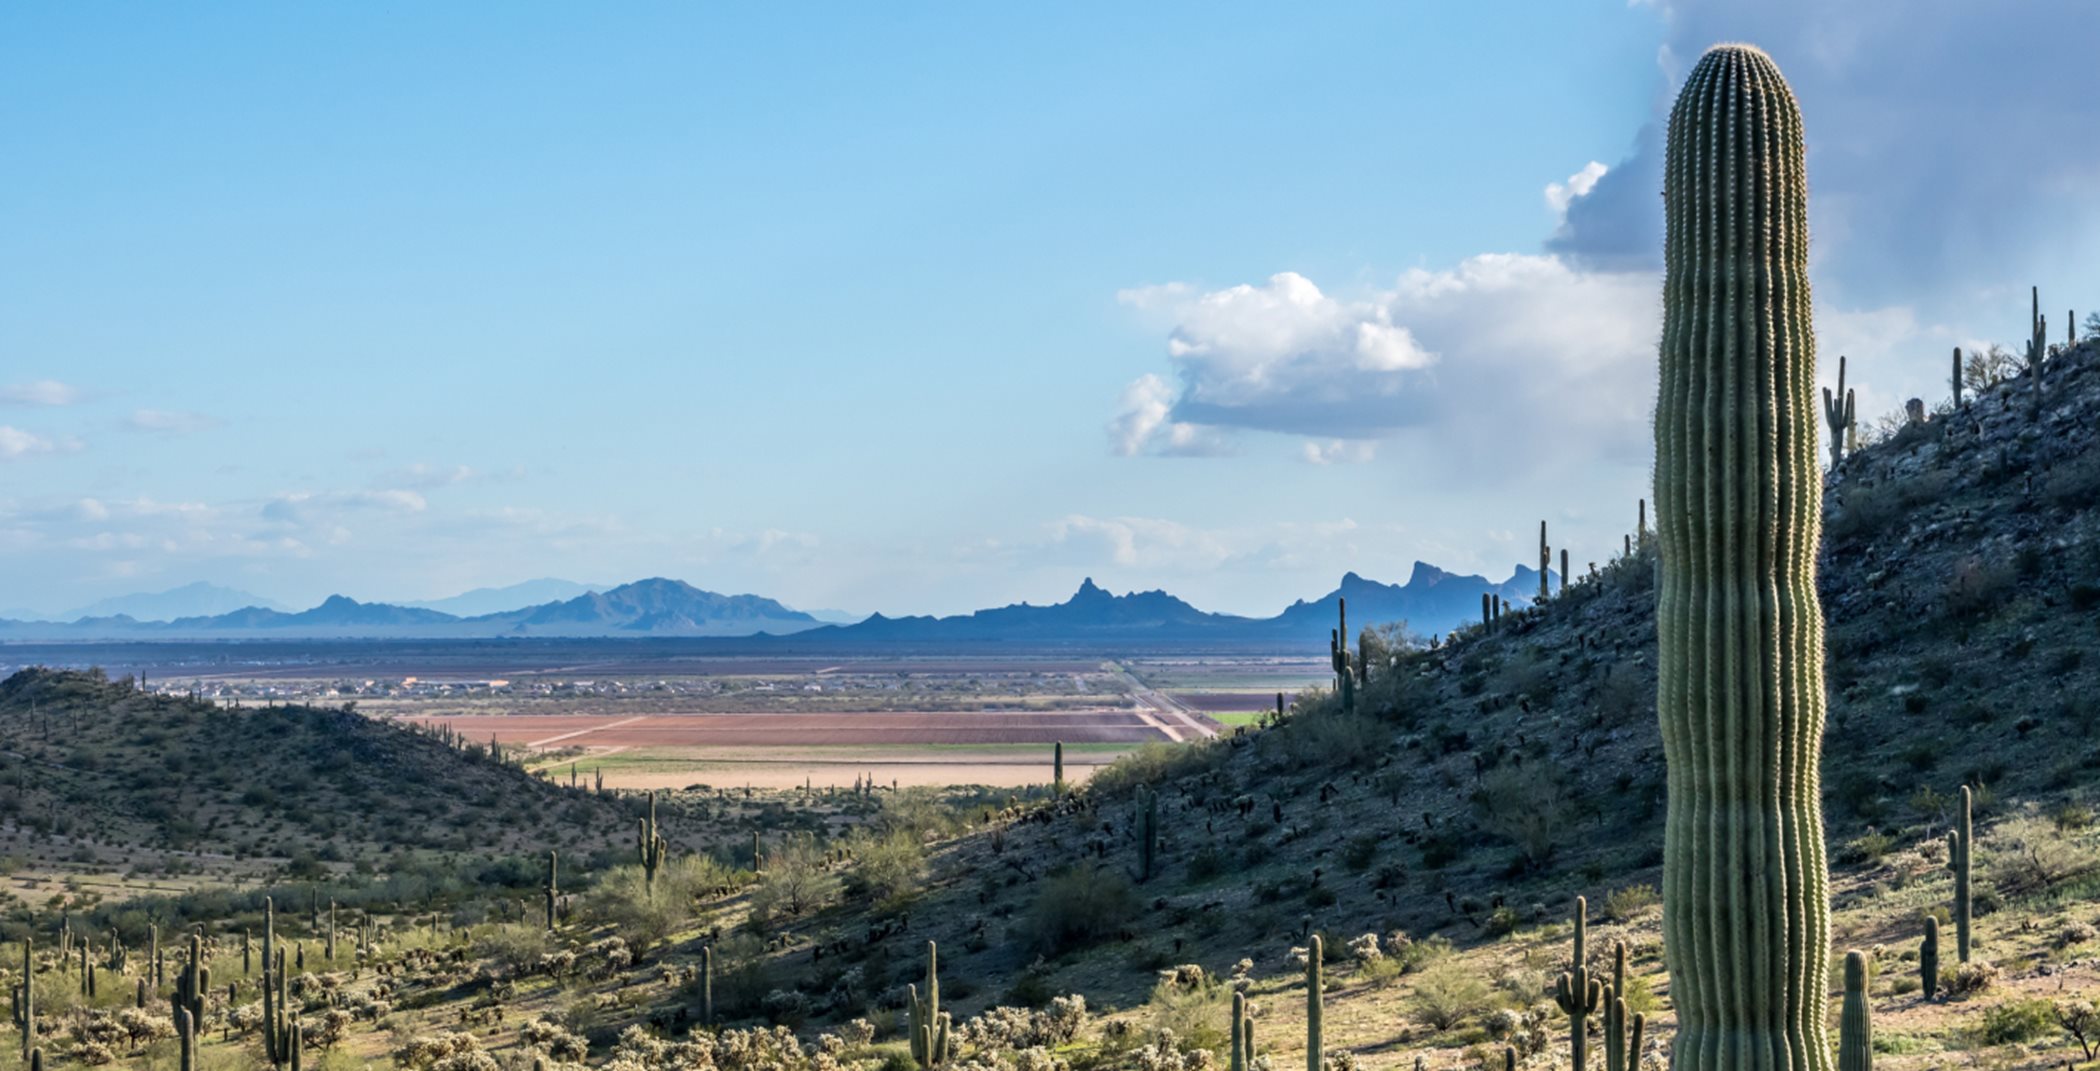 Desert trail with a cactus in the foreground and mountains in the background